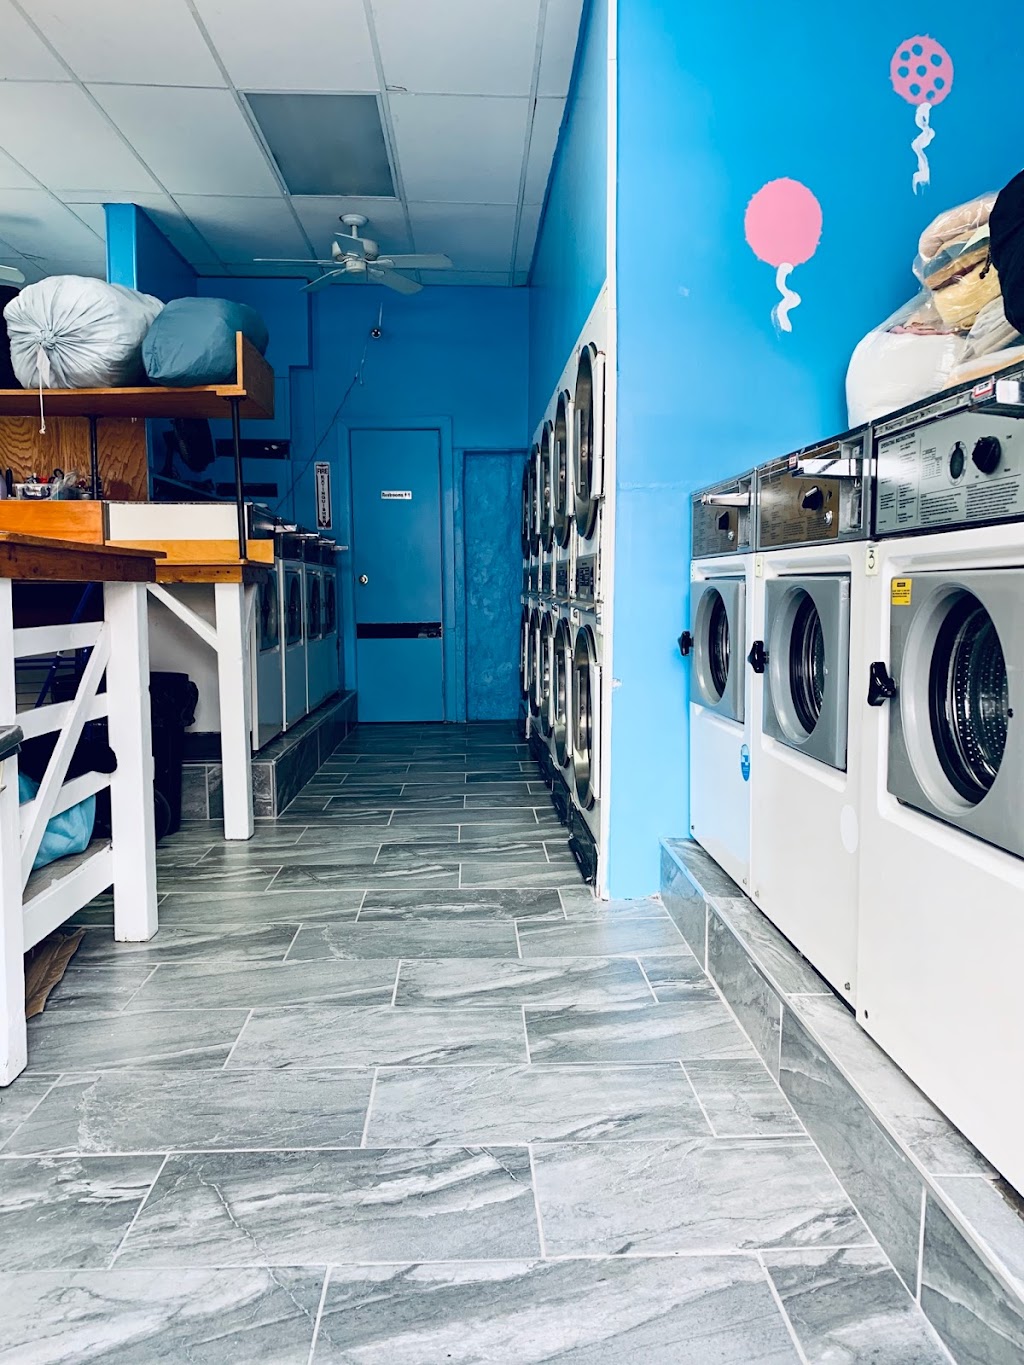 Ms. Babbling Bubbles Laundromat | 2816 Middletown Rd, Bronx, NY 10461 | Phone: (718) 828-0805